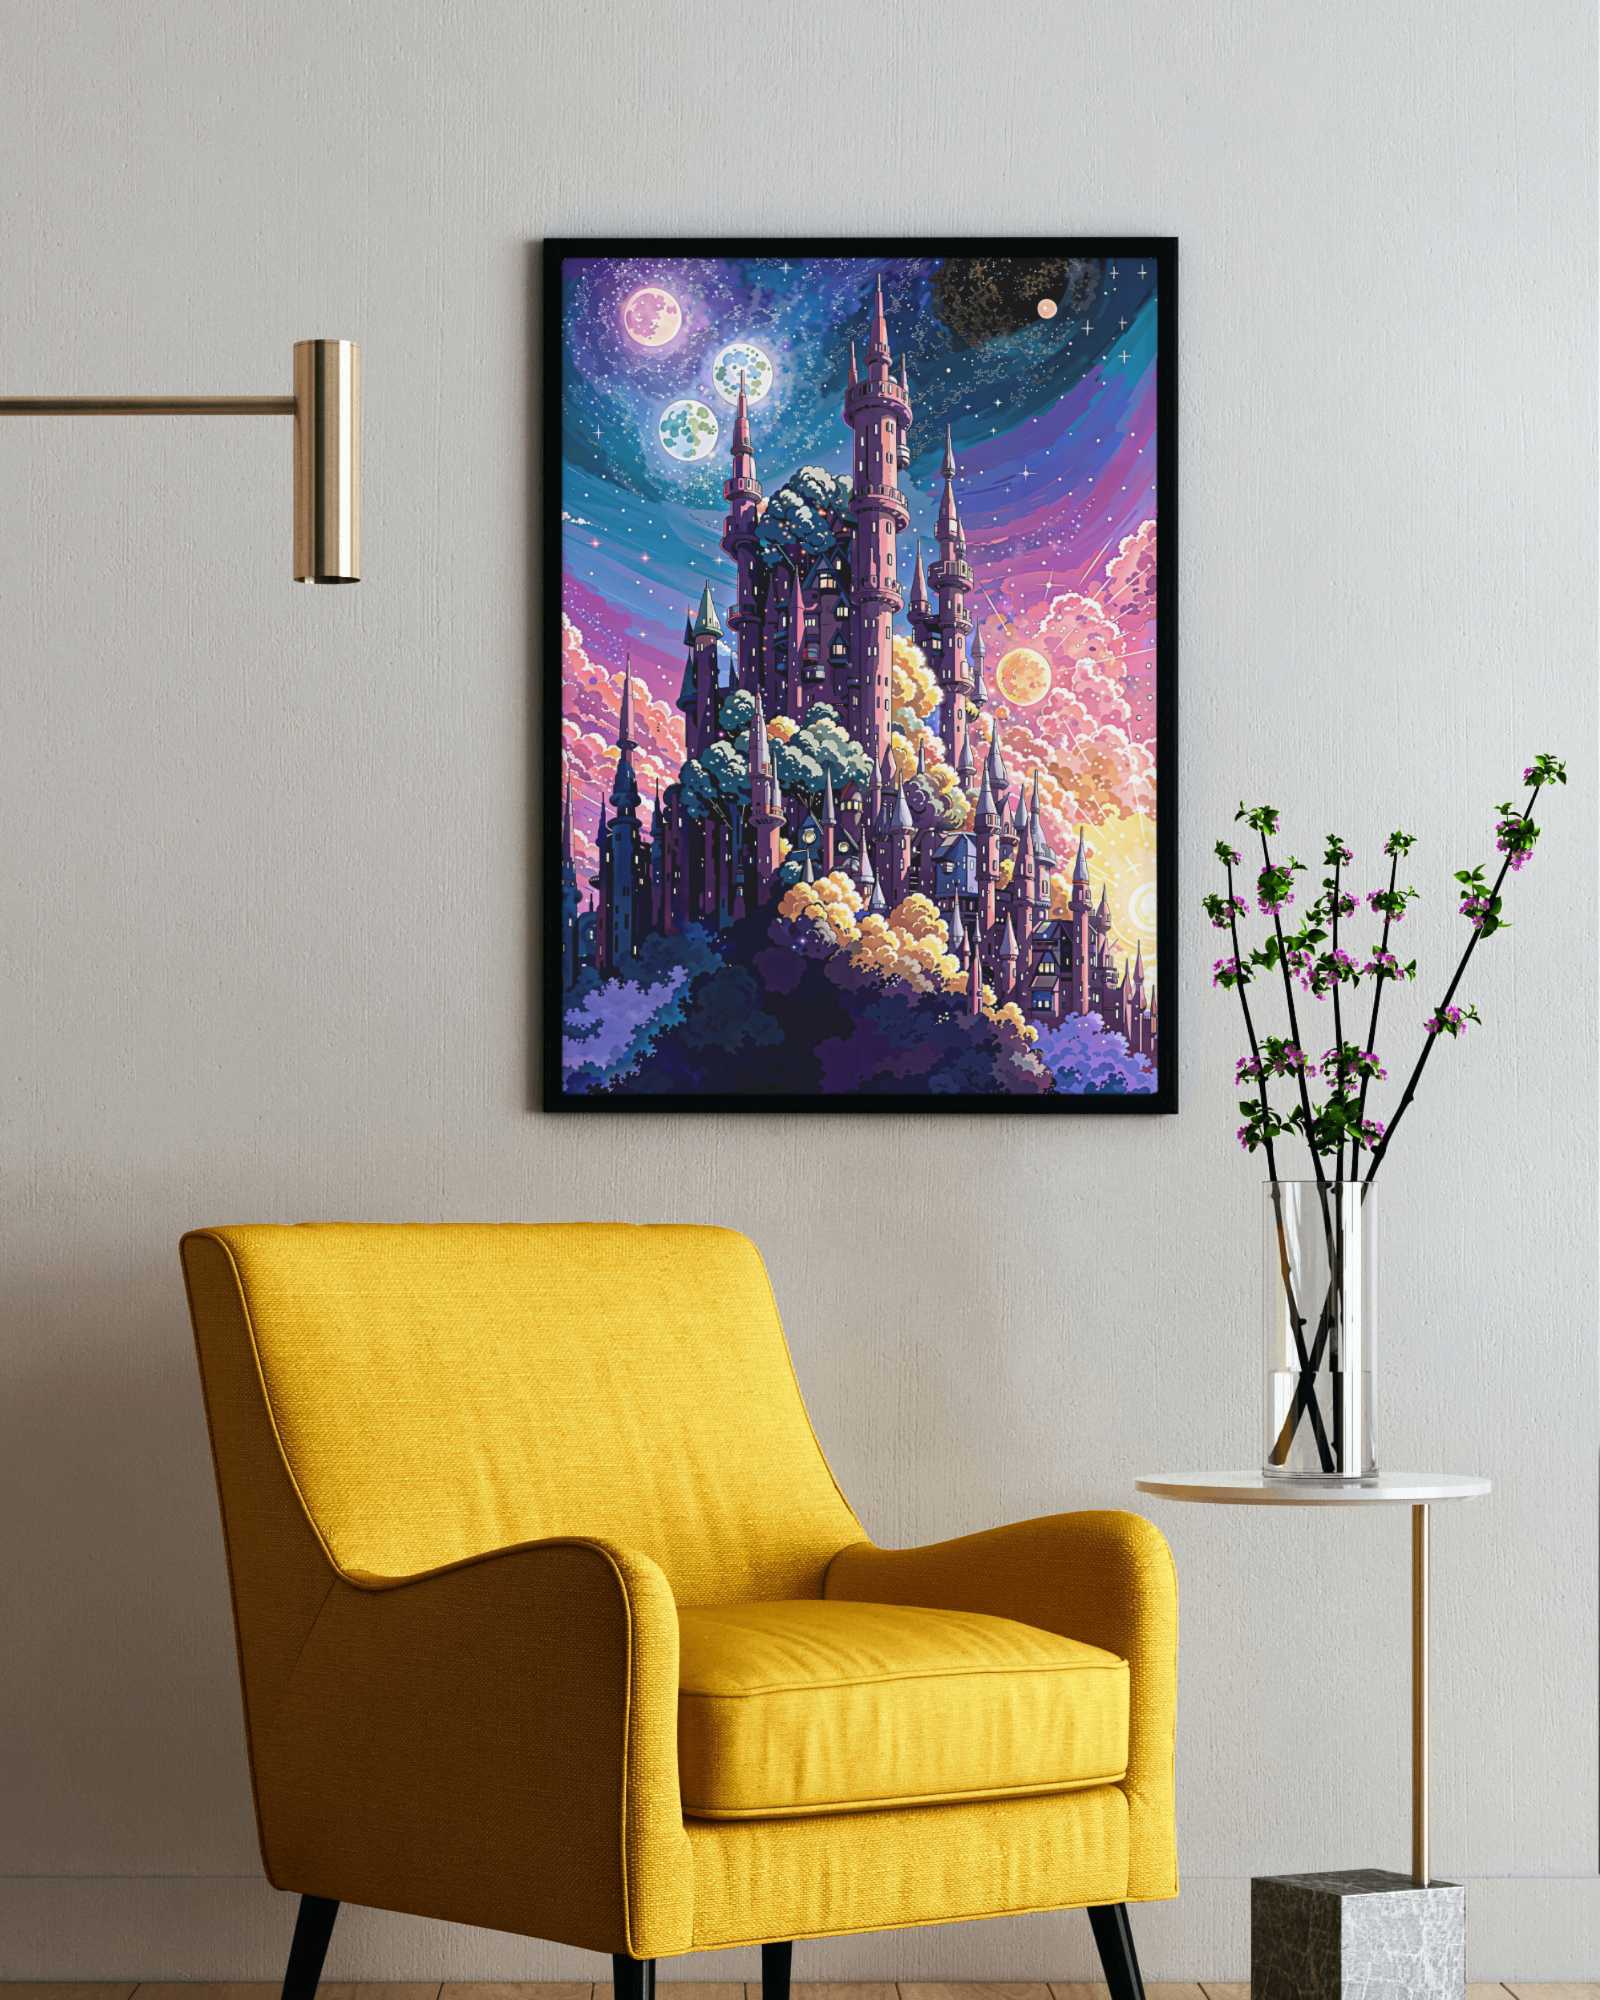 Far end of the universe - Poster - Ever colorful